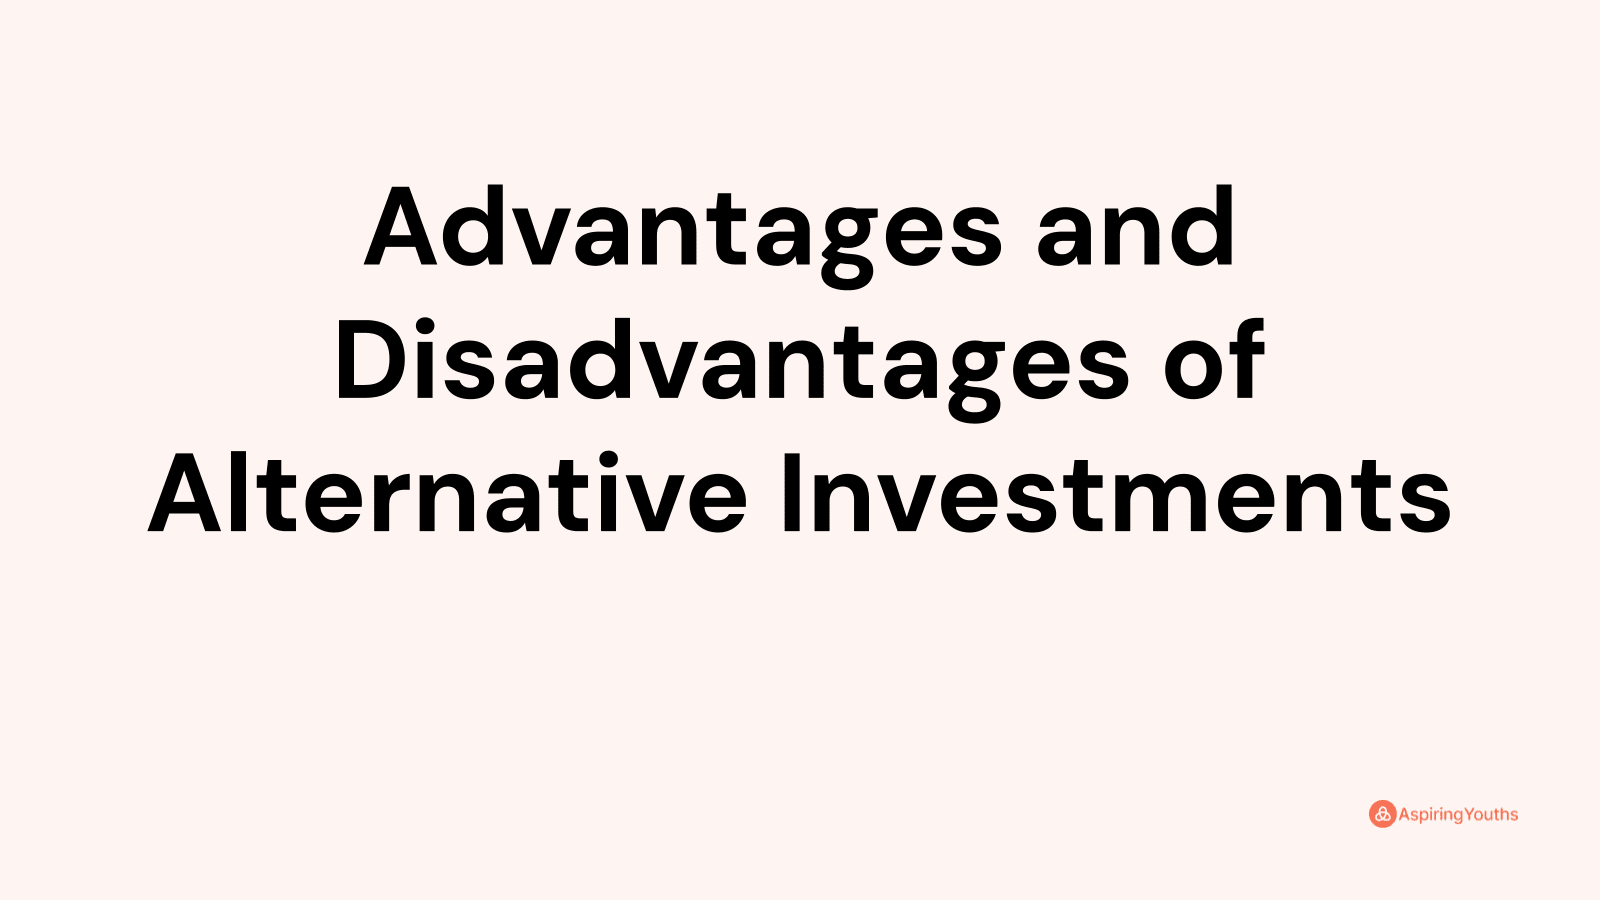 Advantages and disadvantages of Alternative Investments